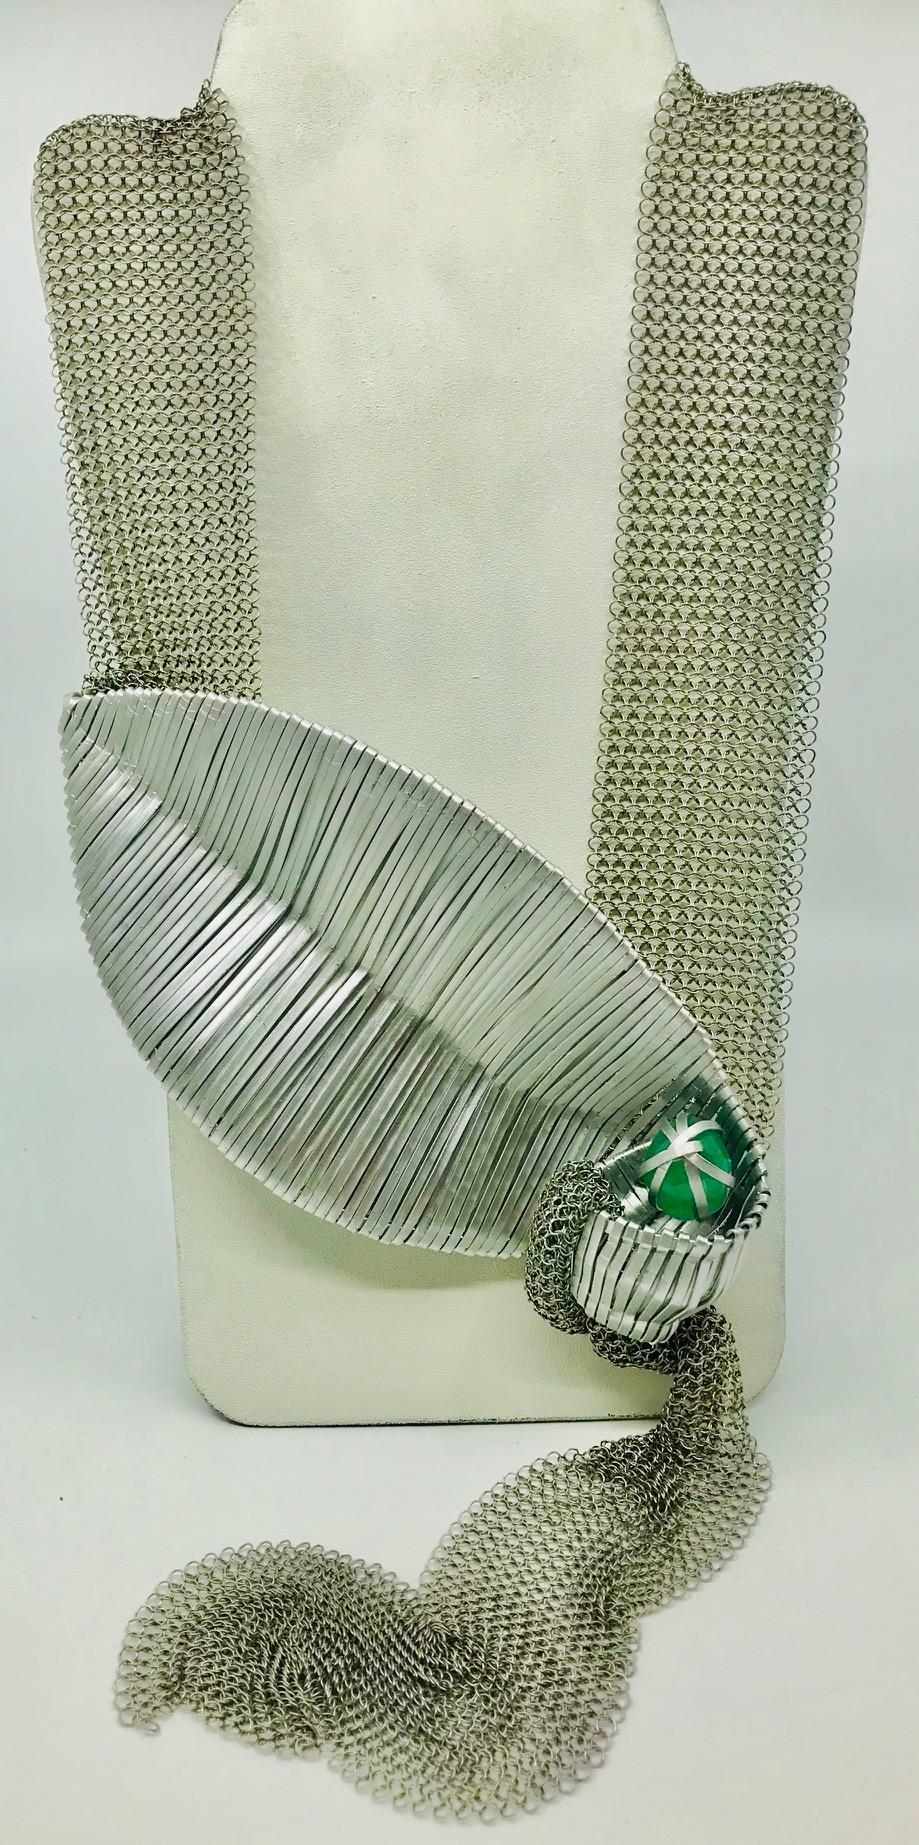  Emerald Pendant on Stainless steel mesh, consists of  around 80 carat Emerald cabochon in an aluminum hand crafted cage on Stainless steel chainmail. This creation in collaboration with well known Croatian sculptor  can be worn as a long necklace